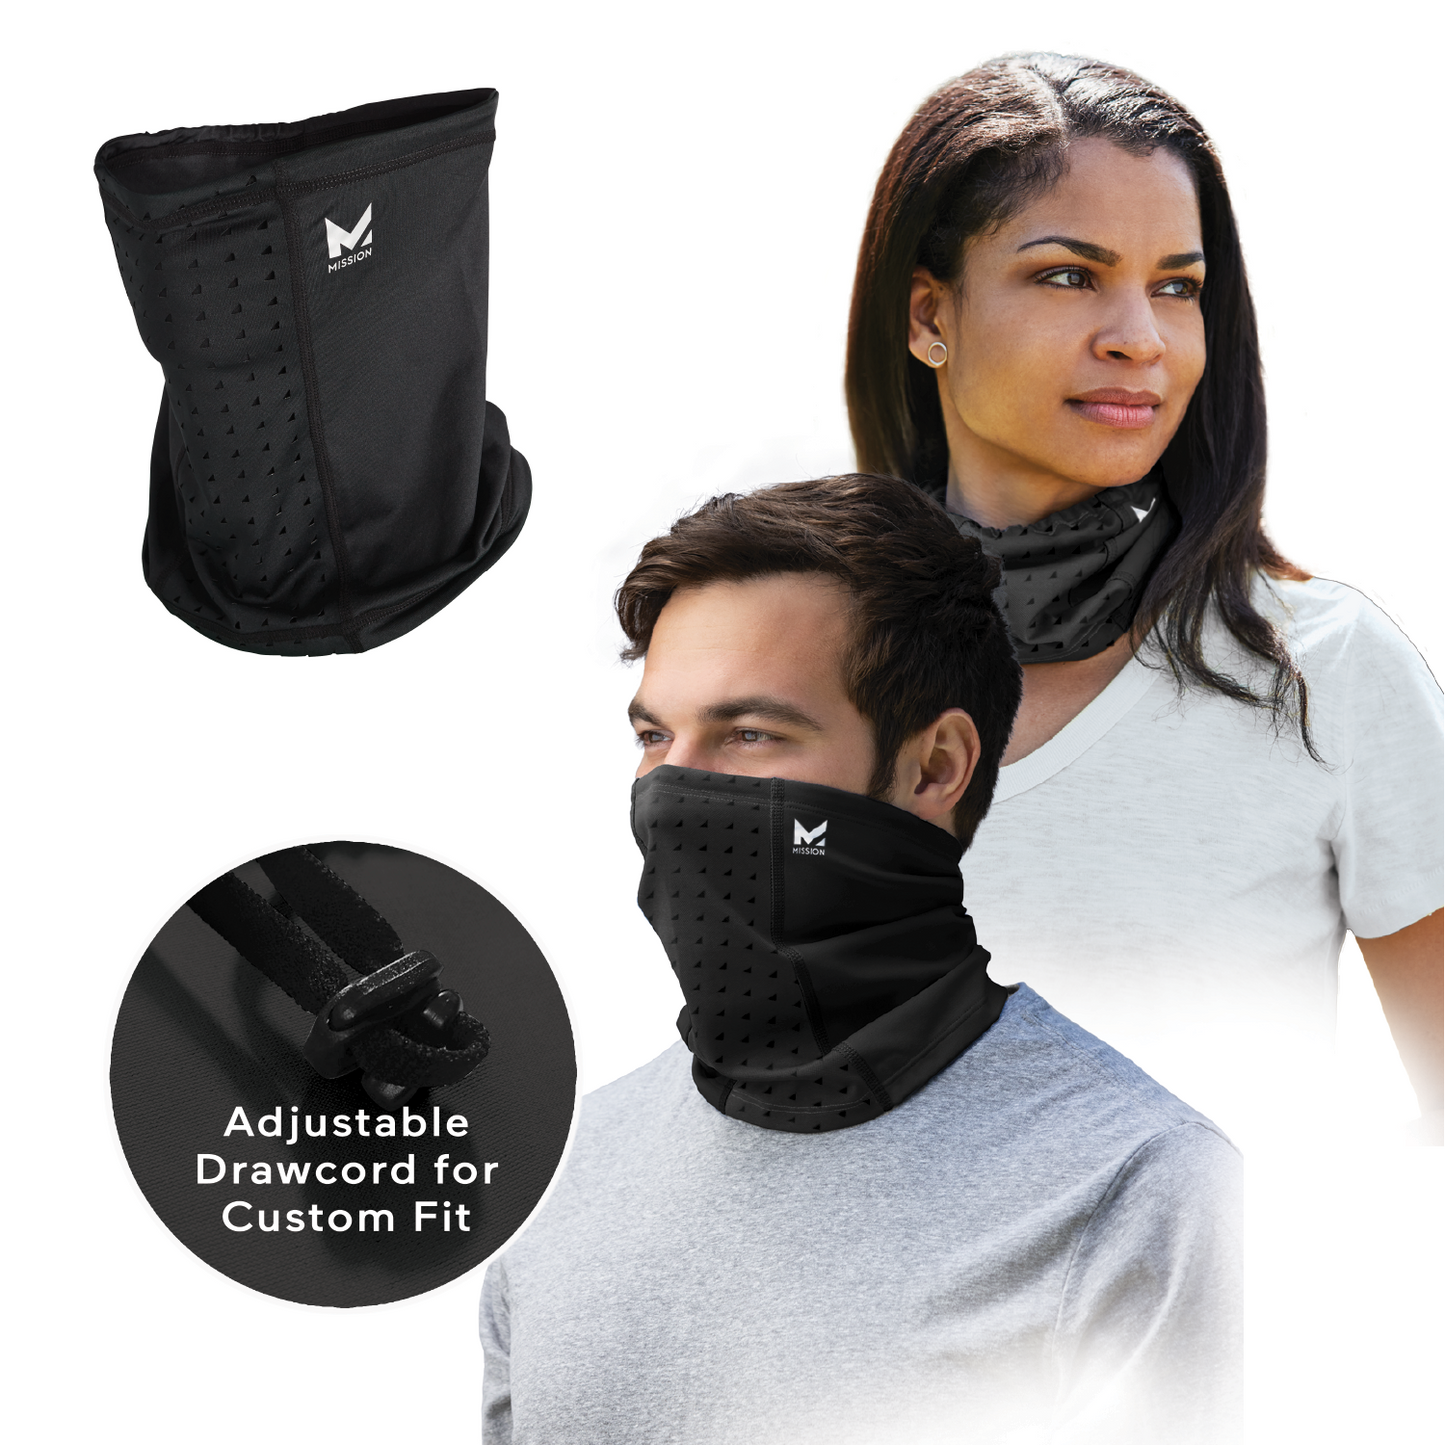 ALL-SEASON ADJUSTABLE GAITER【Cash On Delivery + Local Stock (Express 3 Day Delivery)】